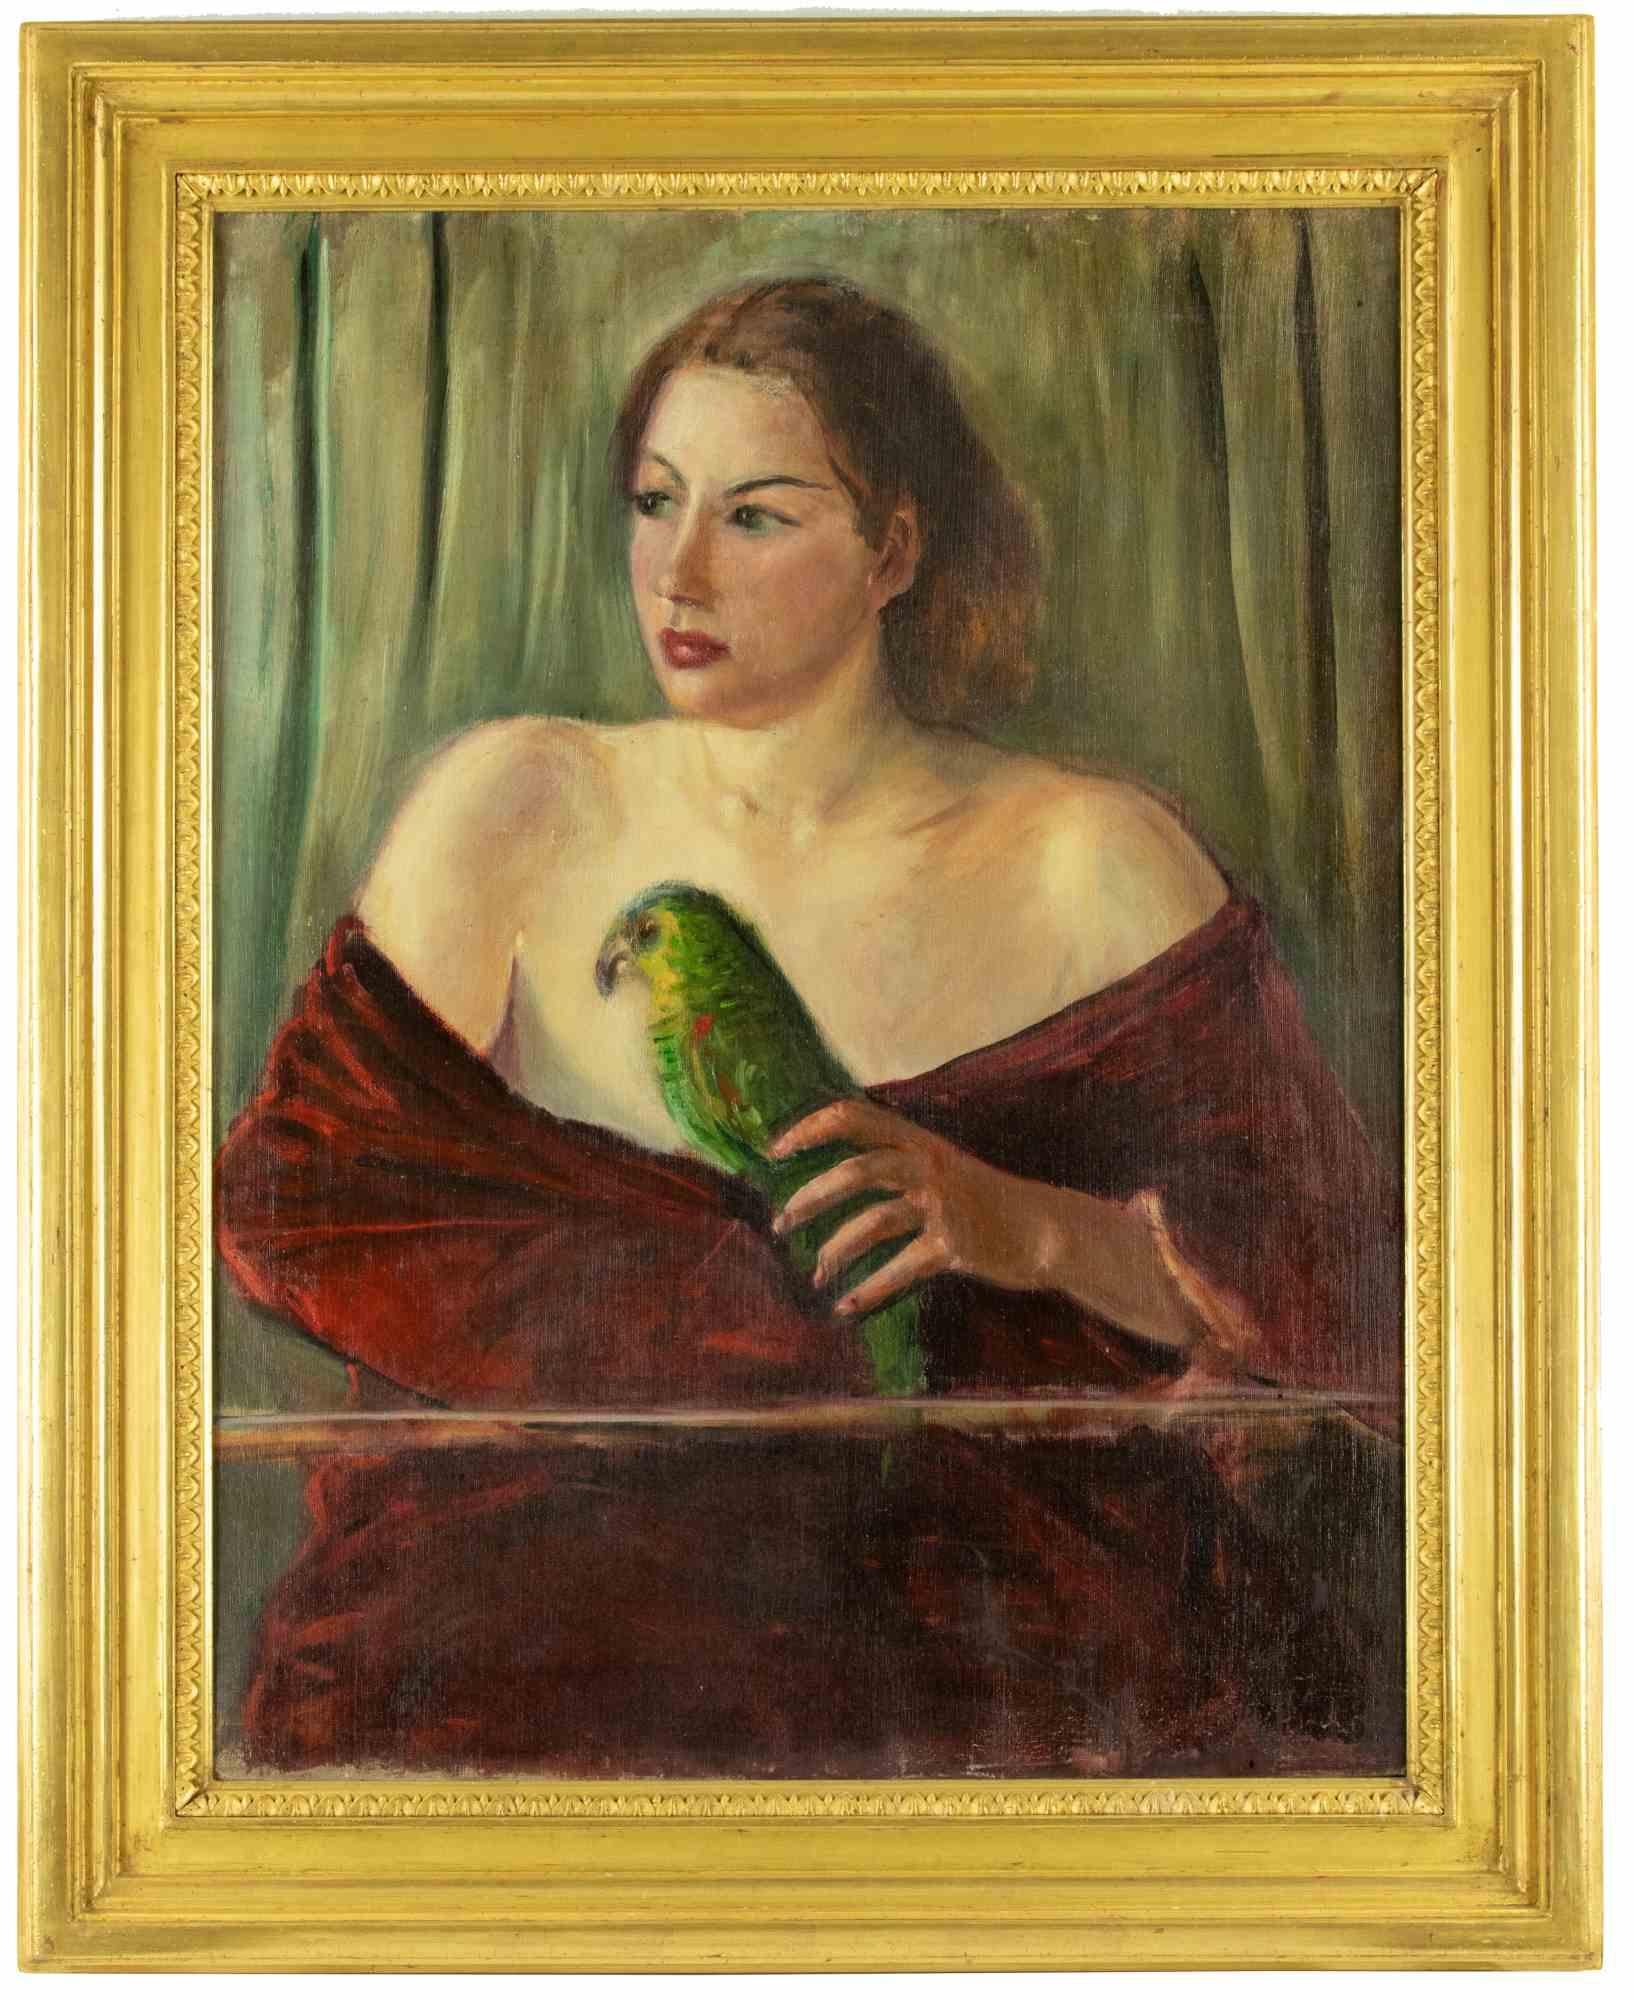 Woman with parrot is an orignal modern artwork realized by Antonio Feltrinelli in 1930s.

Mixed colored oil painting on canvas.

Includes frame

Not signed.

Antonio Feltrinelli (Milan, 1887 – Gargnano, 1942)
He was born in Milan on June 1, 1887 to